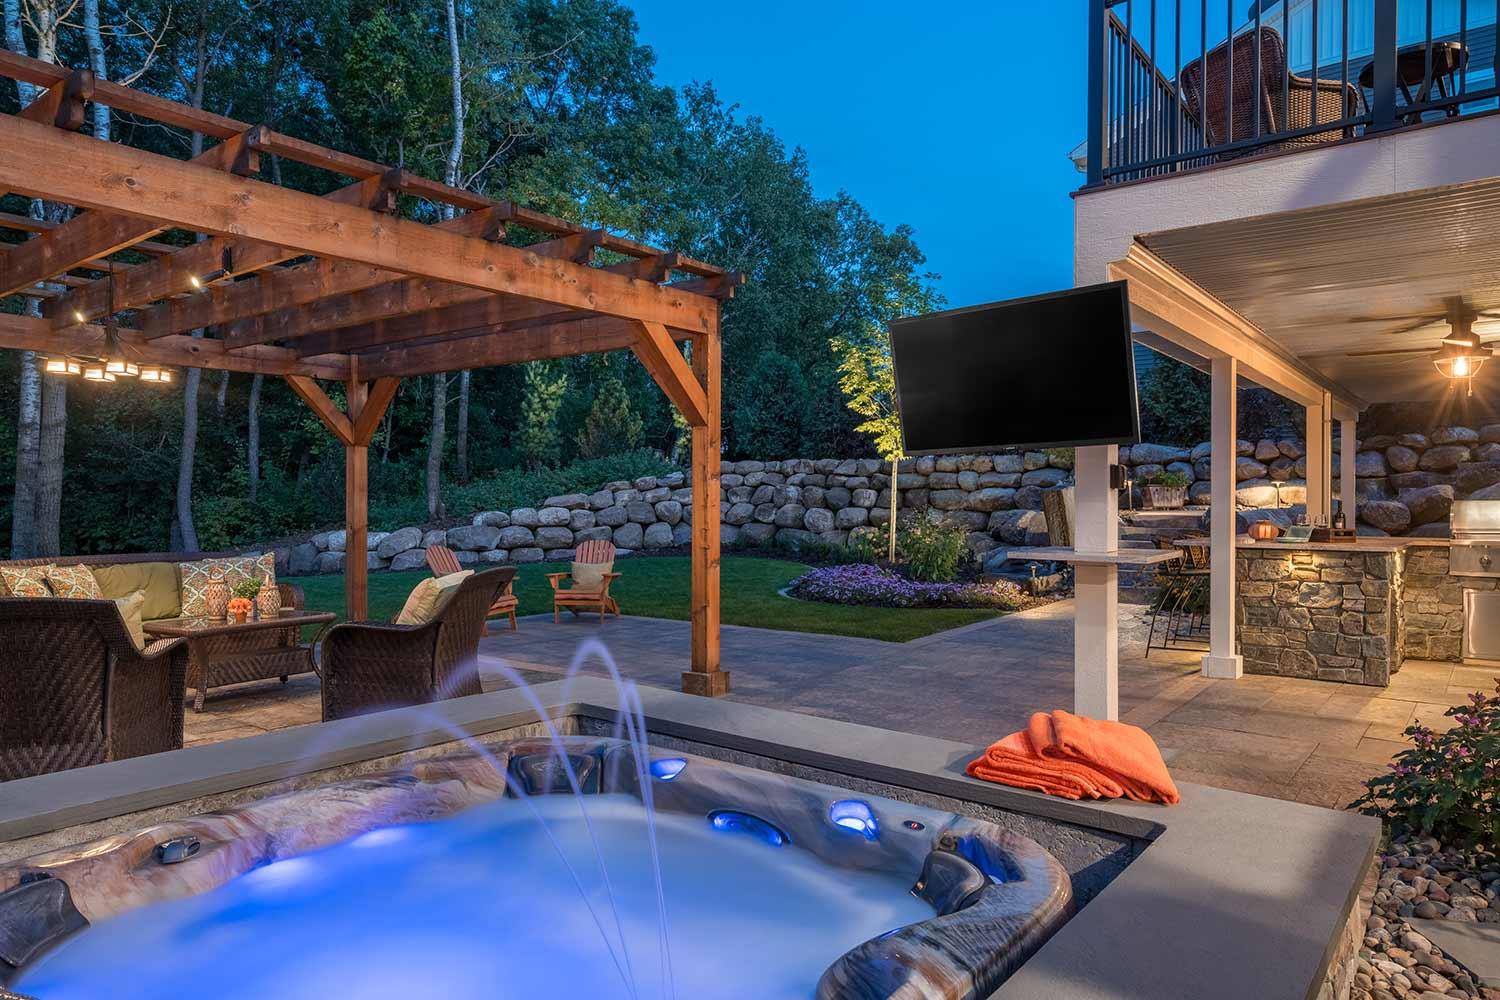 north woods style backyard hot tub with laminar jets and lighting